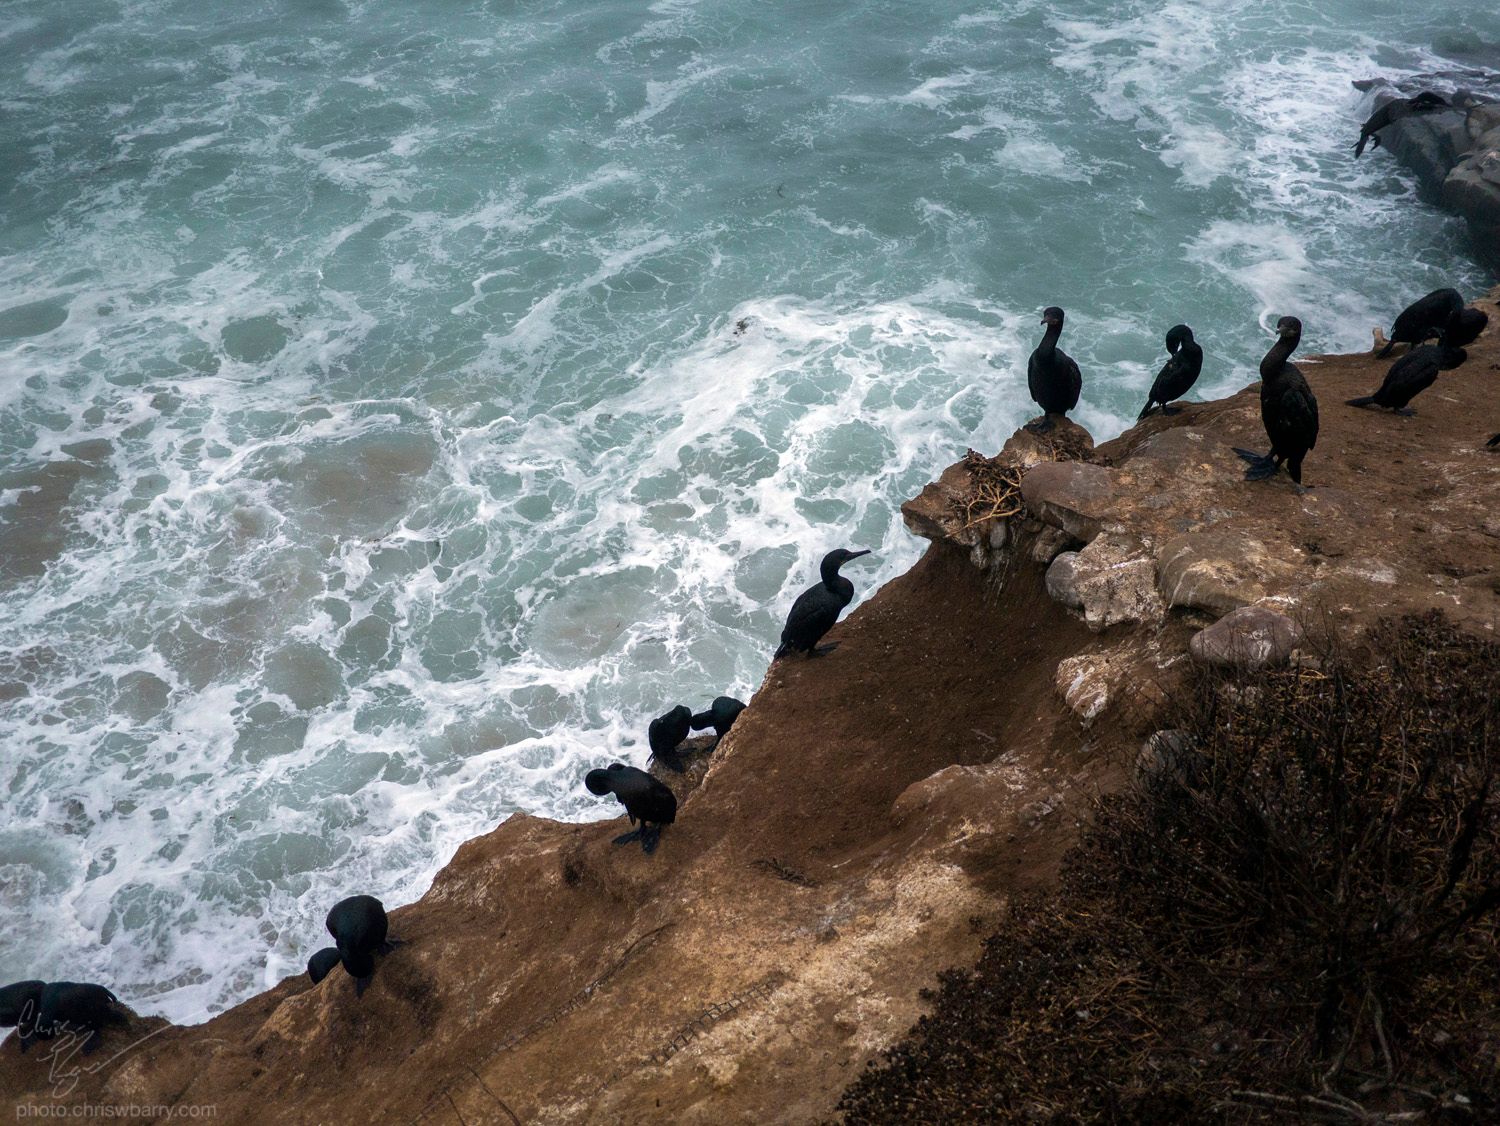 About 11 entirely black cormorants at the edge of a bare dirt cliff. Behind them is foam from a wave that has just crashed